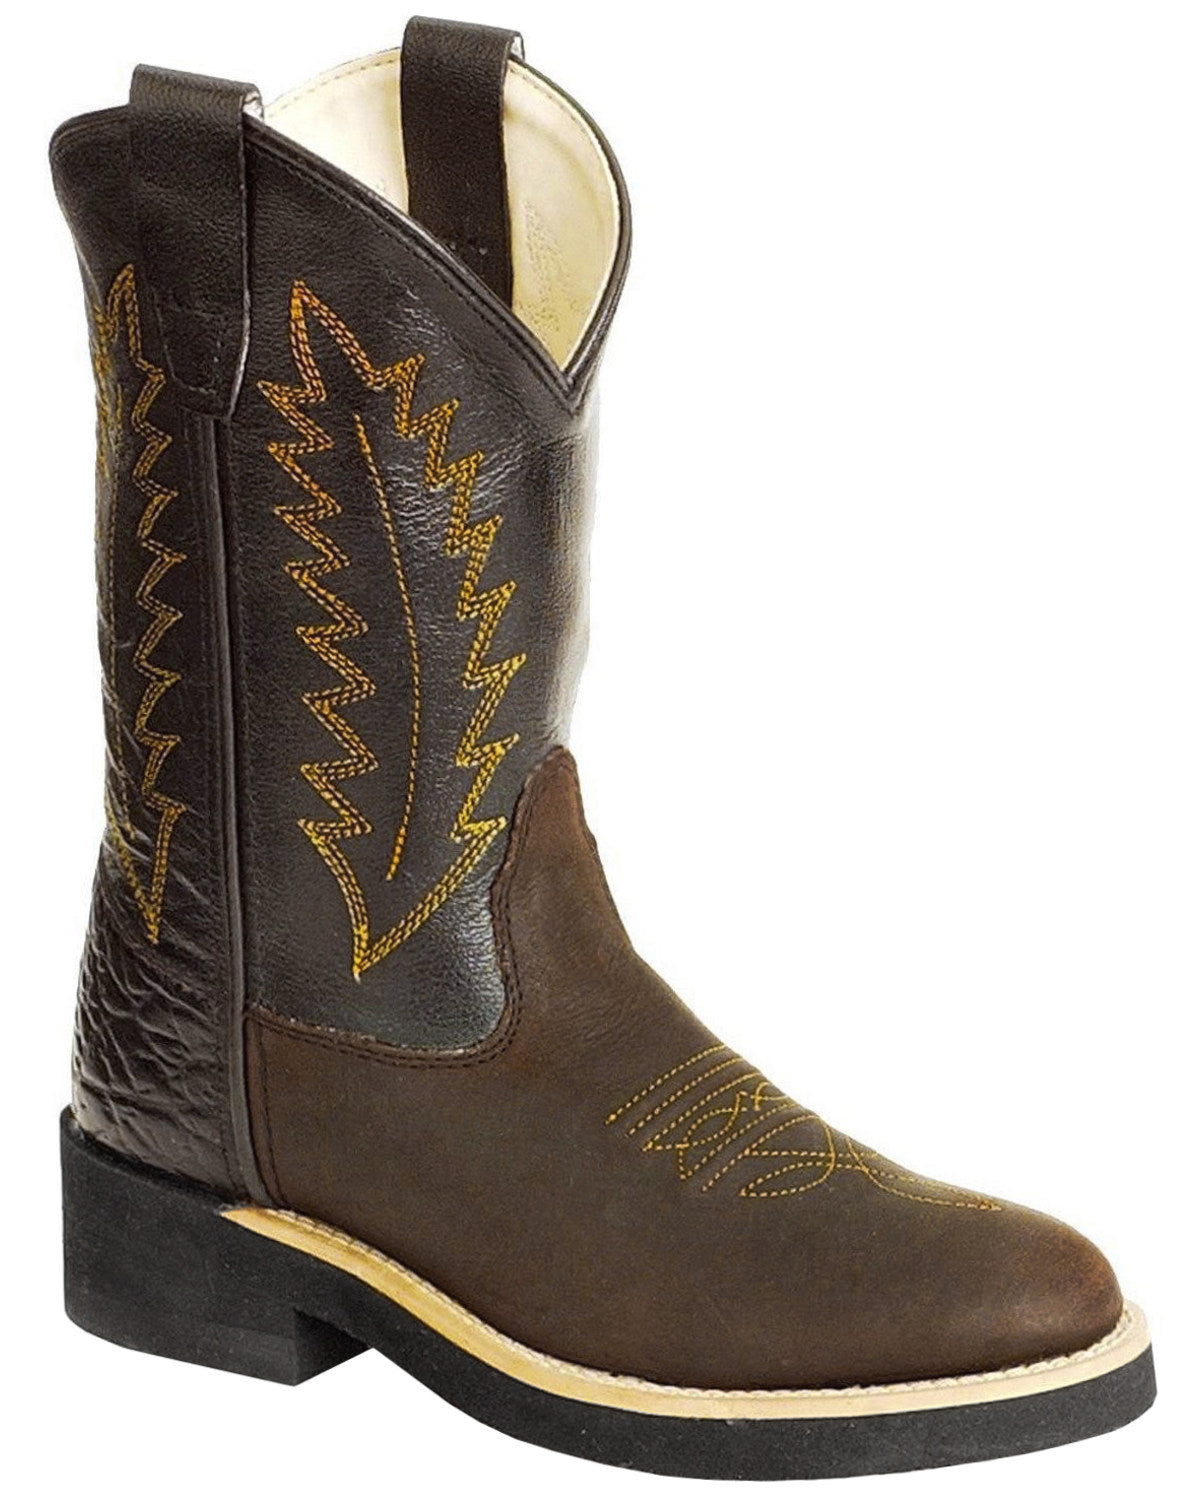 Old West Toddler Cowboy Work Boot